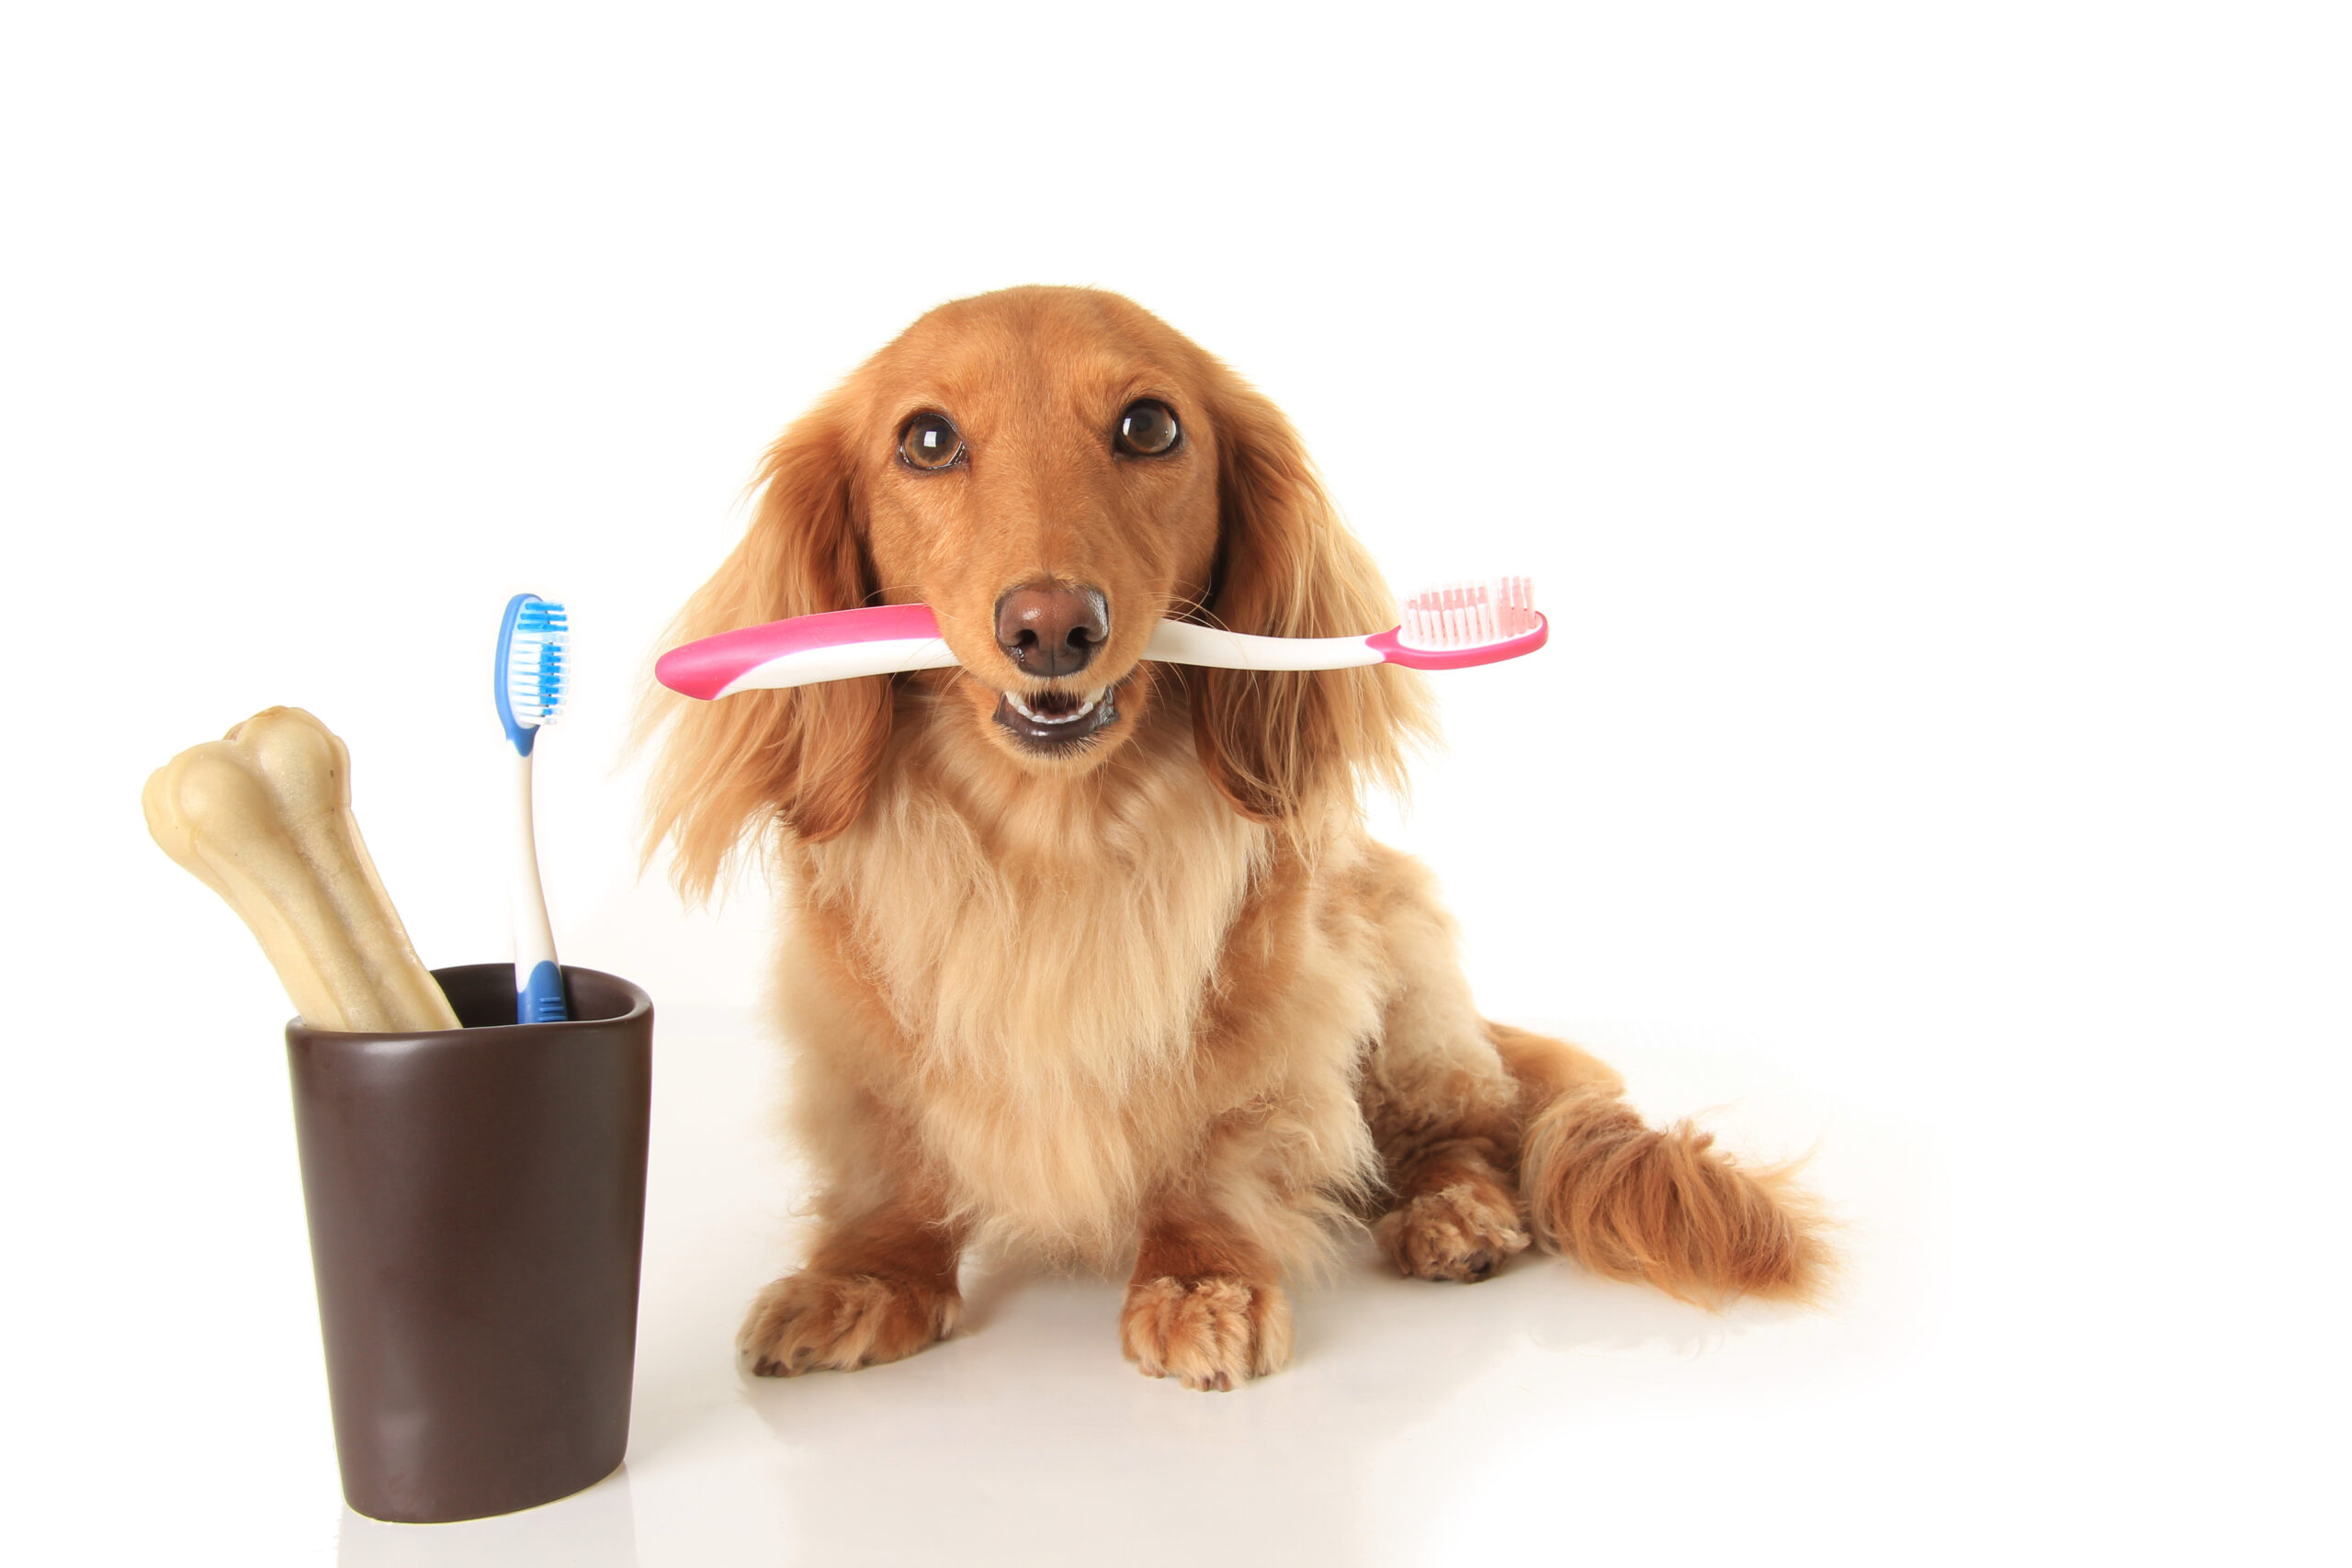 Image of dog with tooth brush and clean teeth